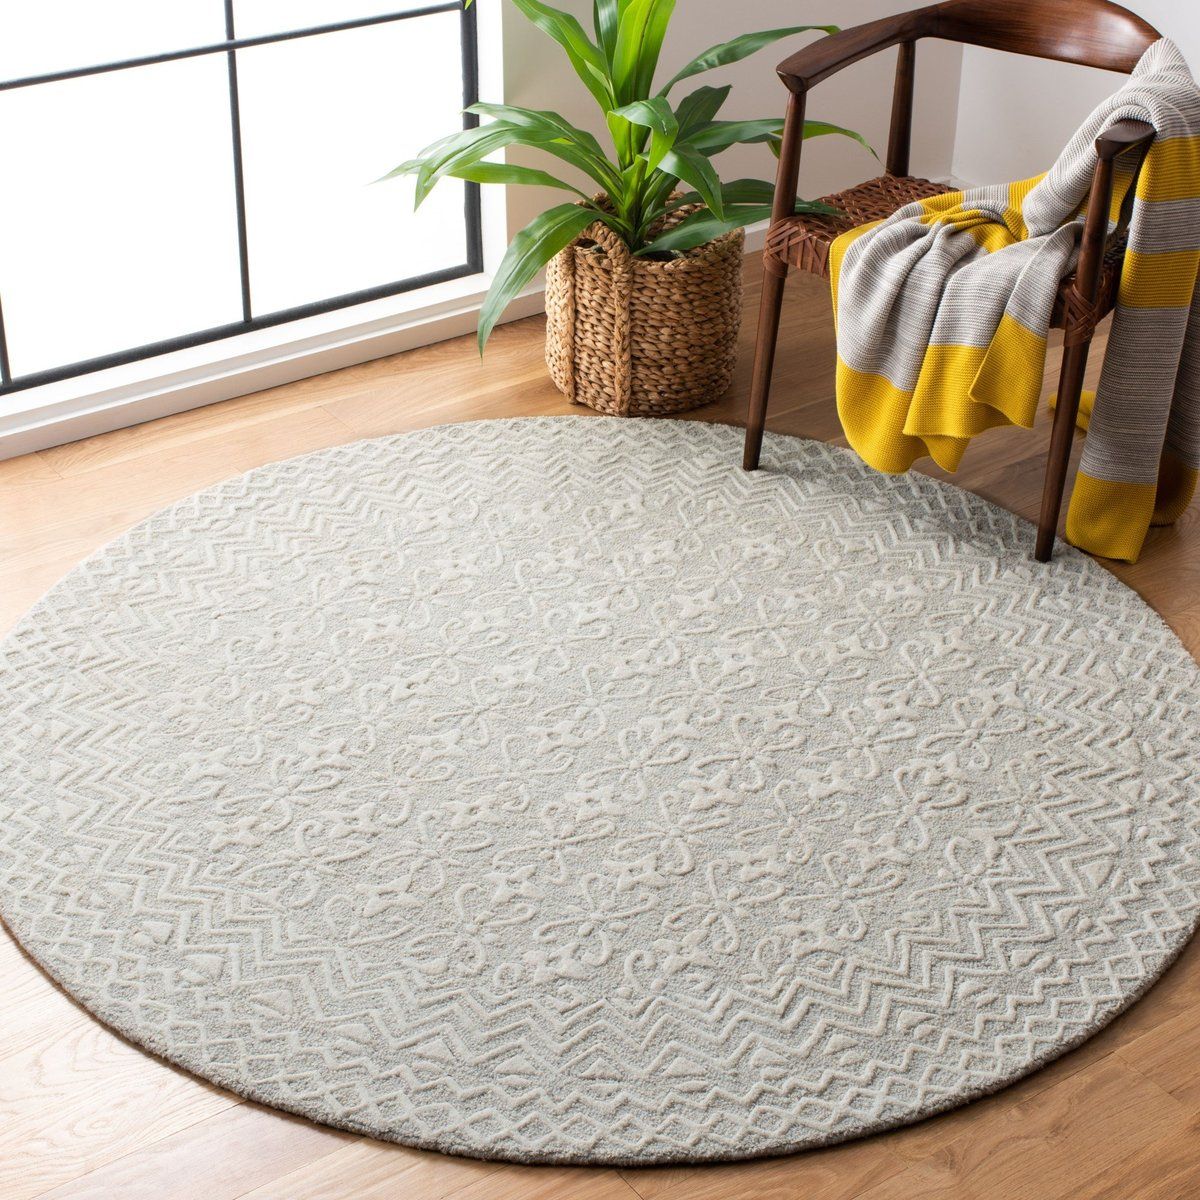 Safavieh Blossom Blm 114 Modern Wool Area Rugs | Rugs Direct Inside Blossom Oval Rugs (Photo 15 of 15)